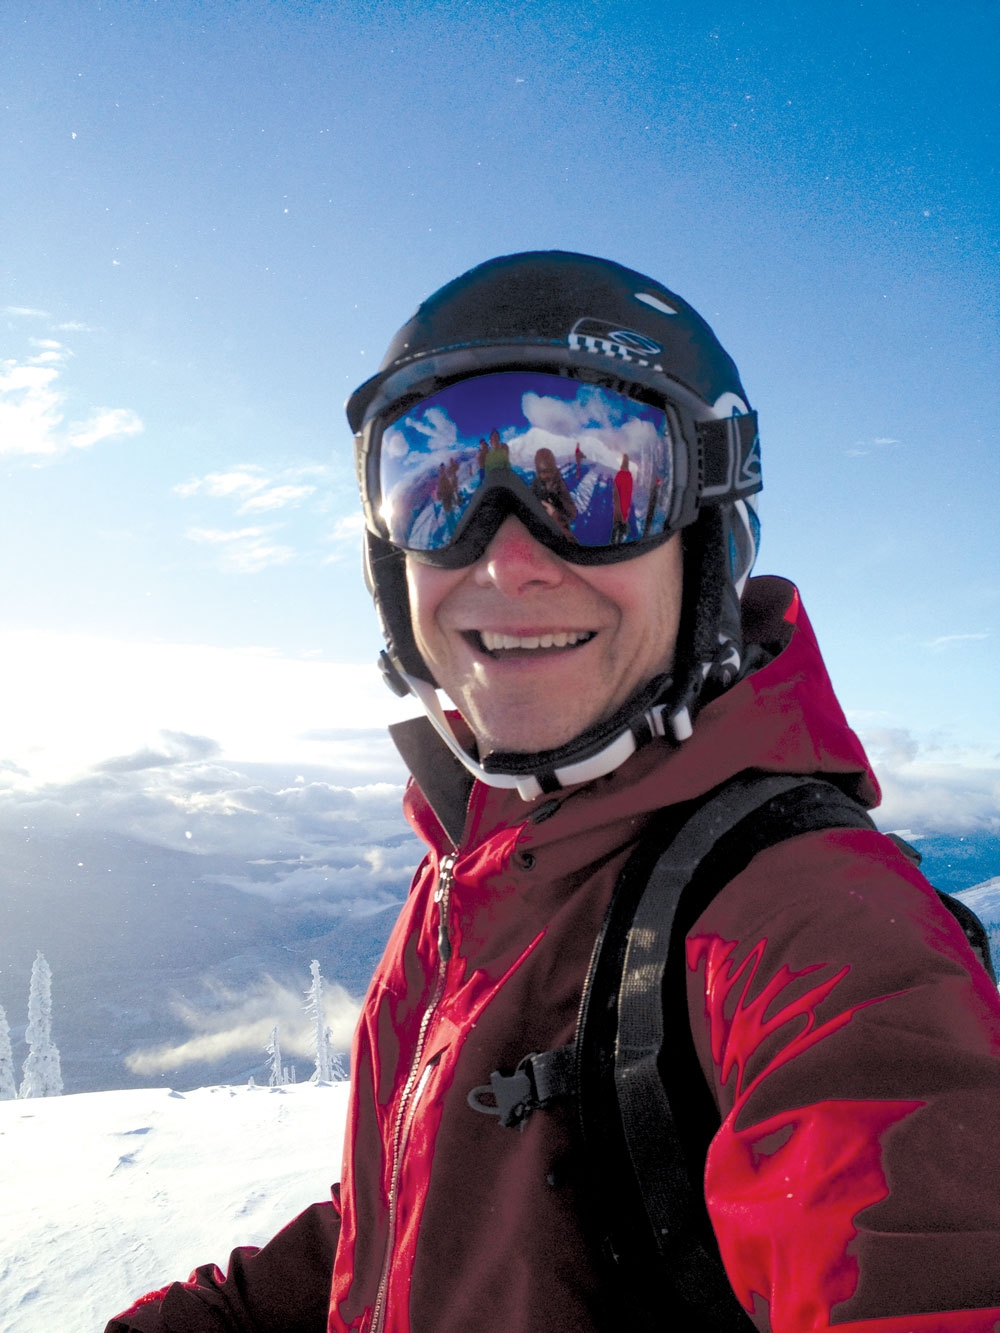 Selfie photo of Powder Matt in his ski gear on a sunny, blue sky day on the Kootenay Mountains of B.C.